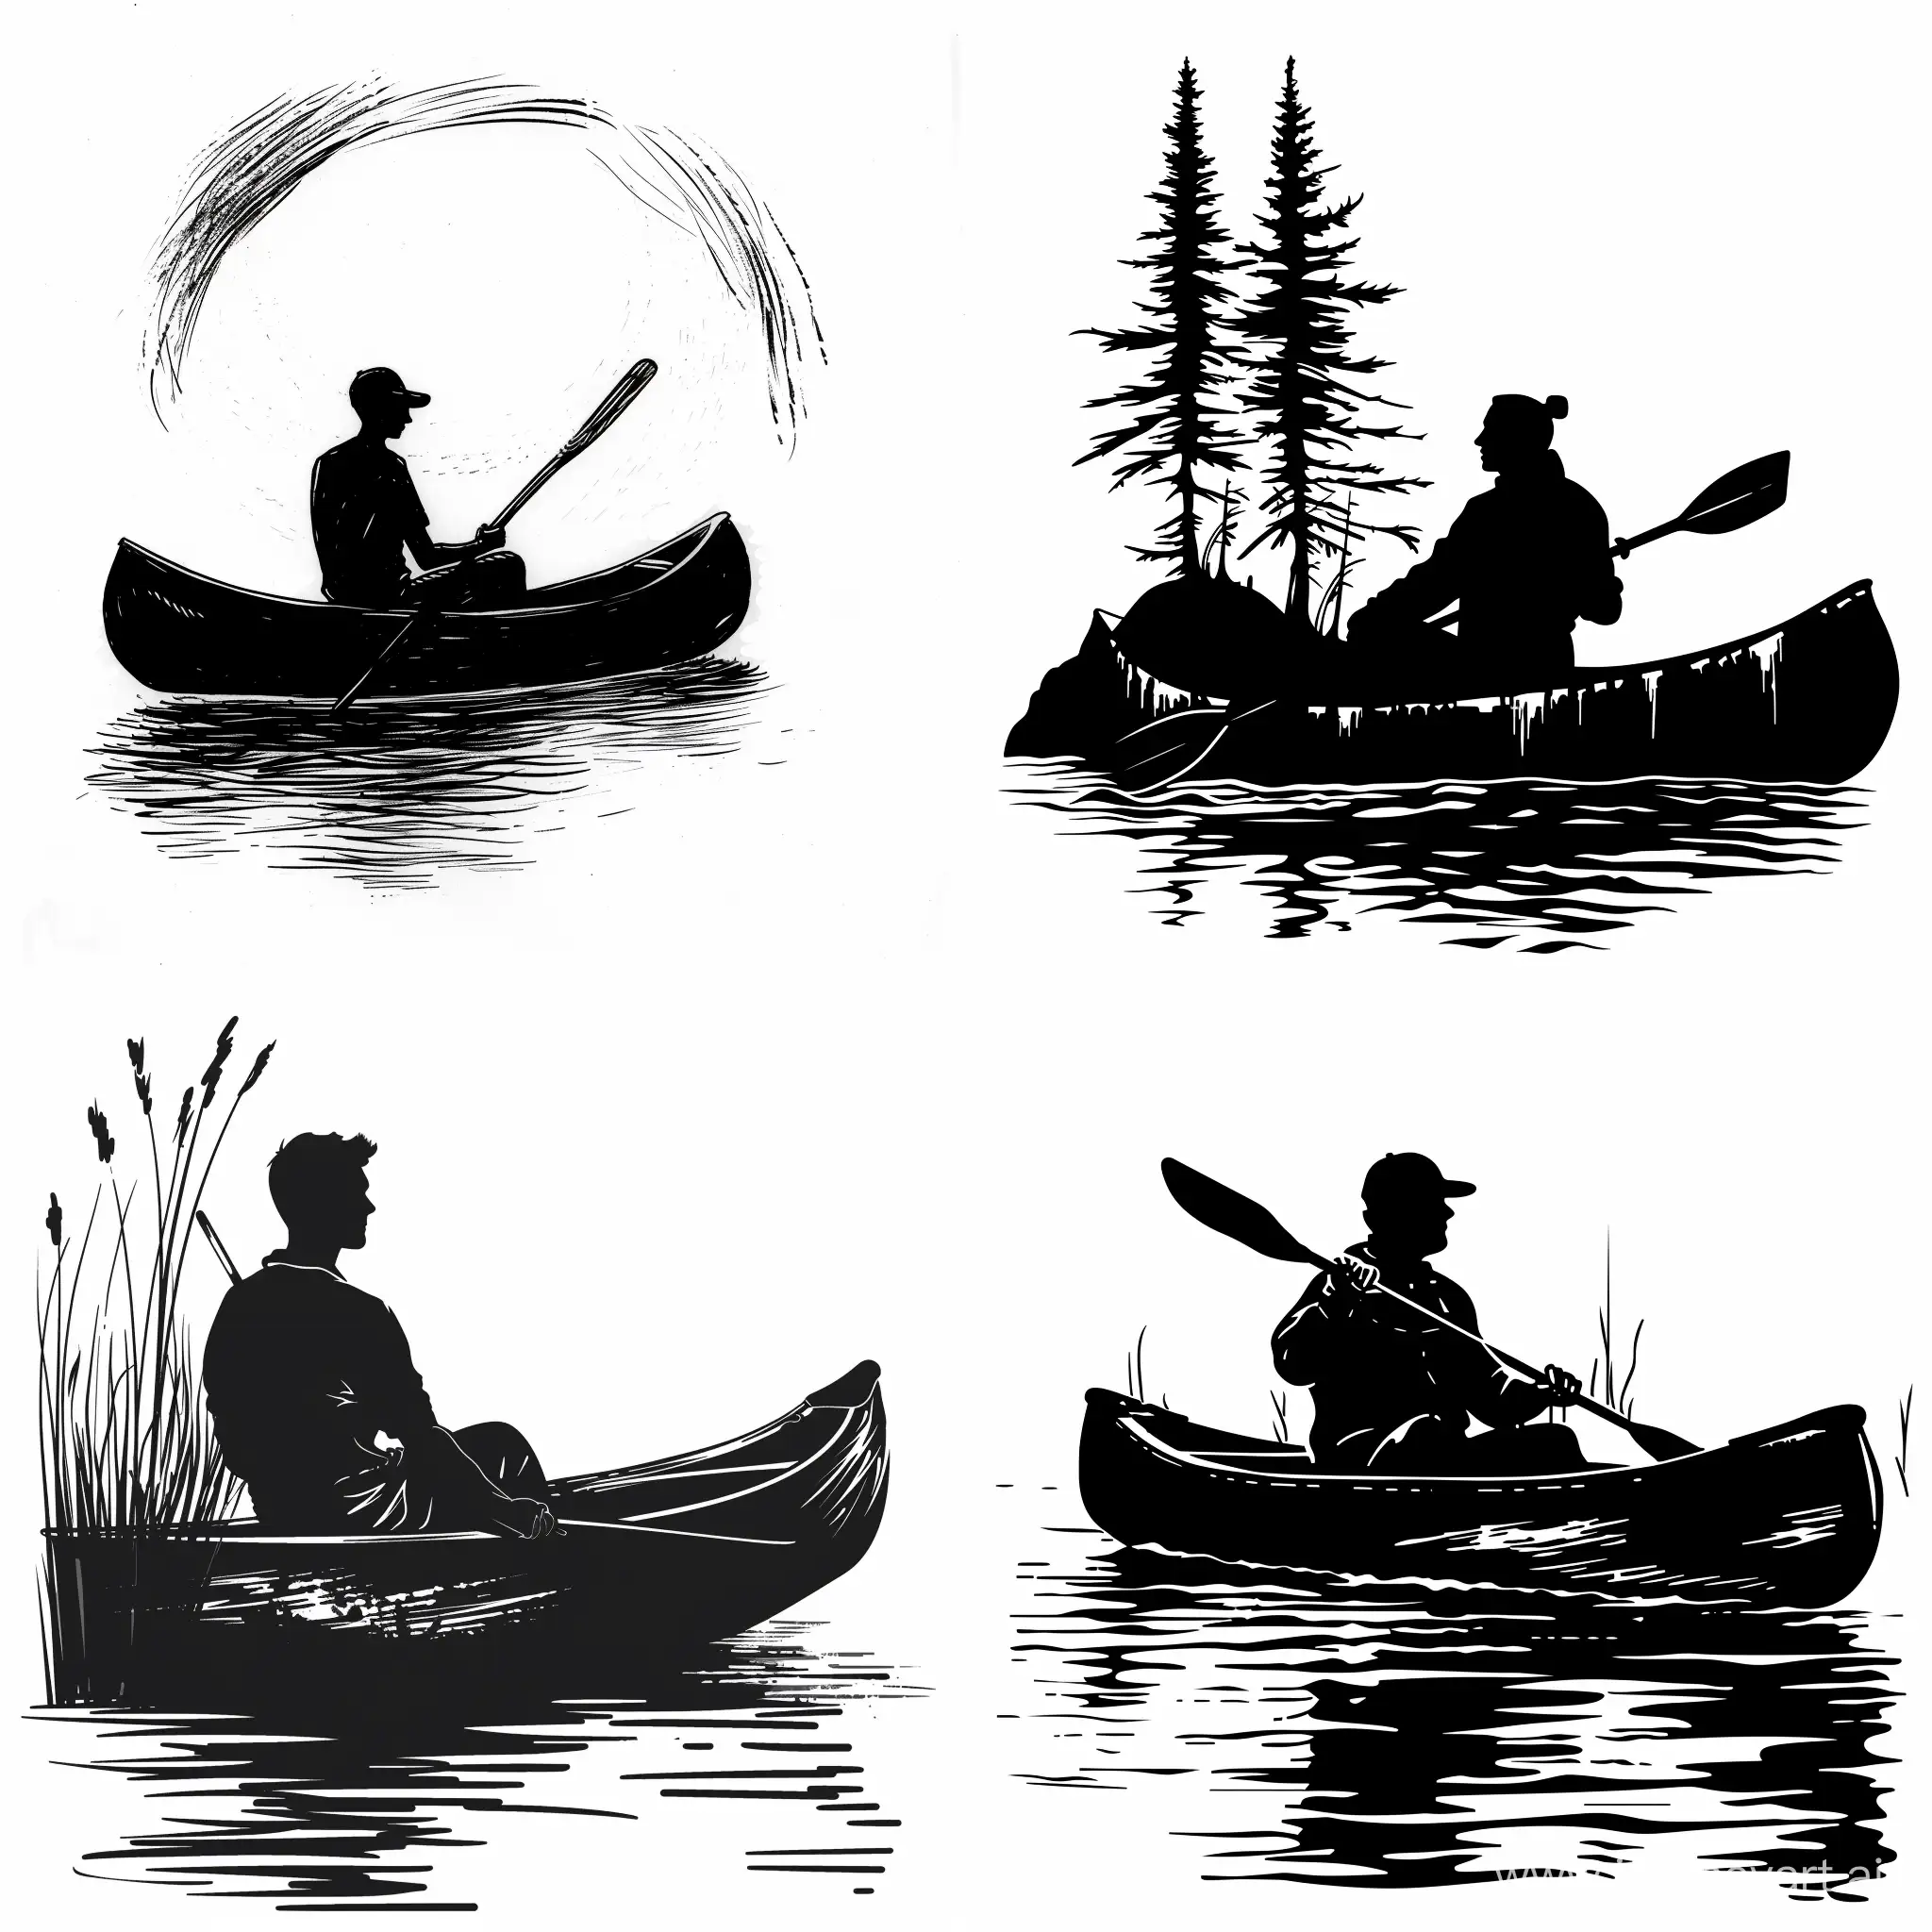 a black and white silhouette illustration of a man sit in a canoe